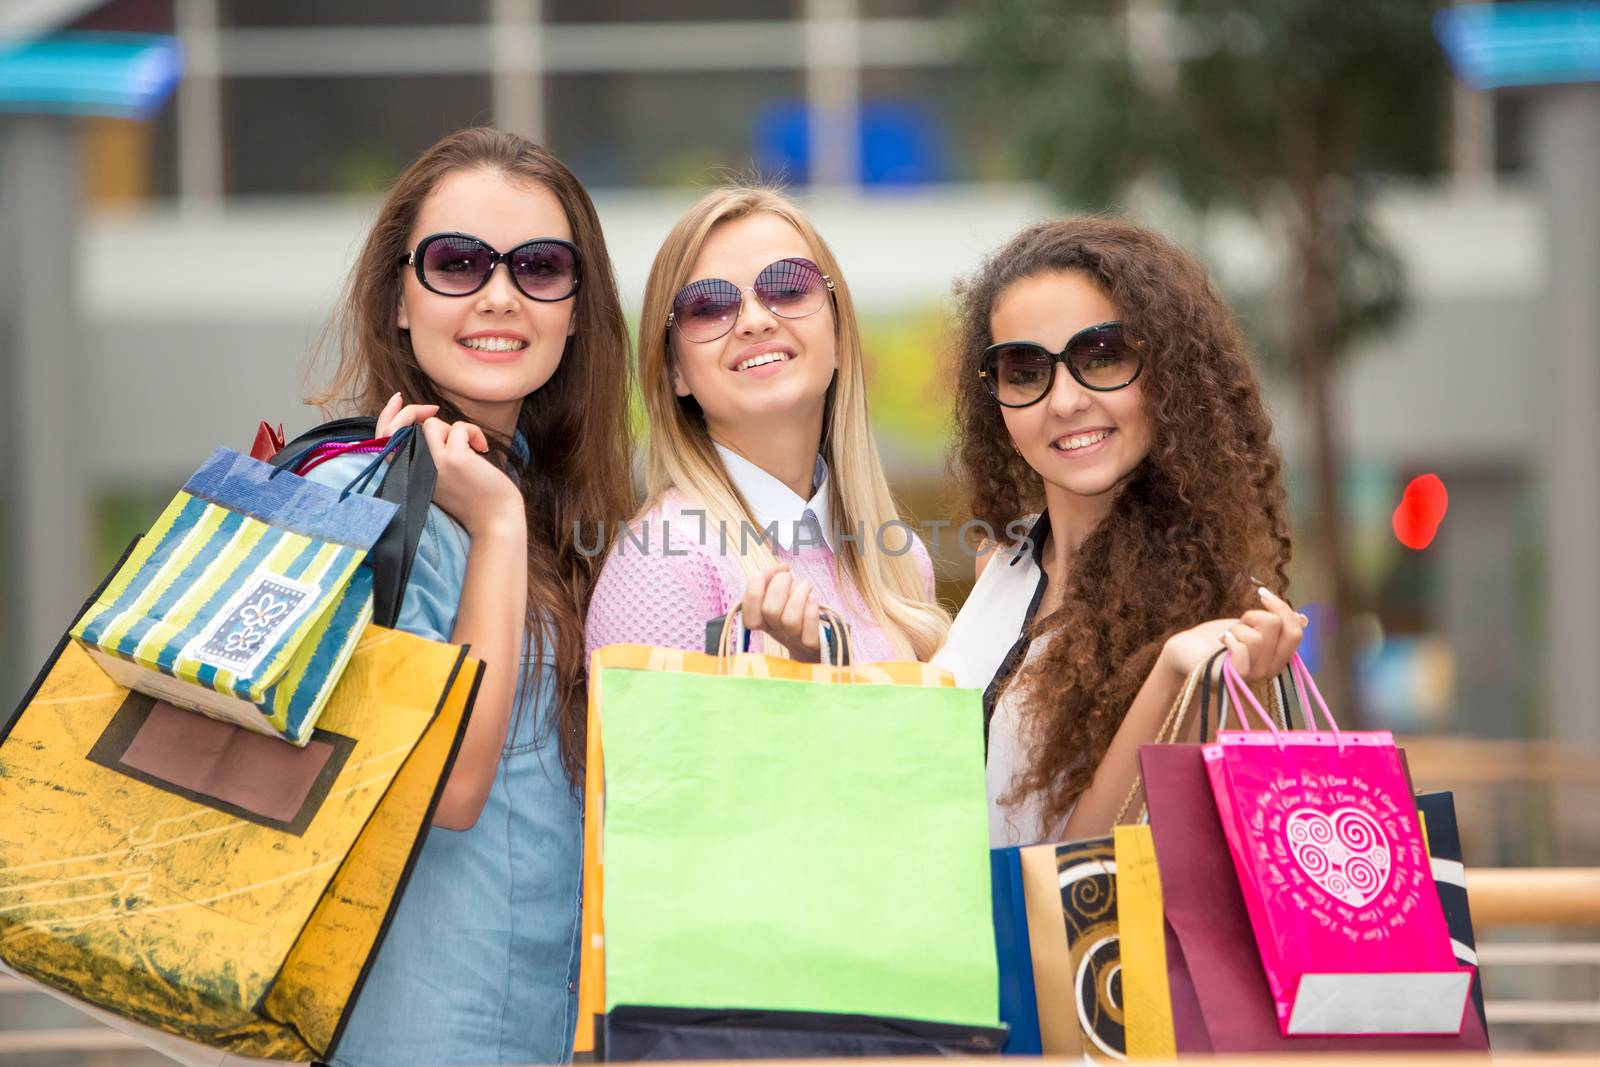 shopping, sale, happy people and tourism concept - three beautiful girls in sunglasses with shopping bags in mall